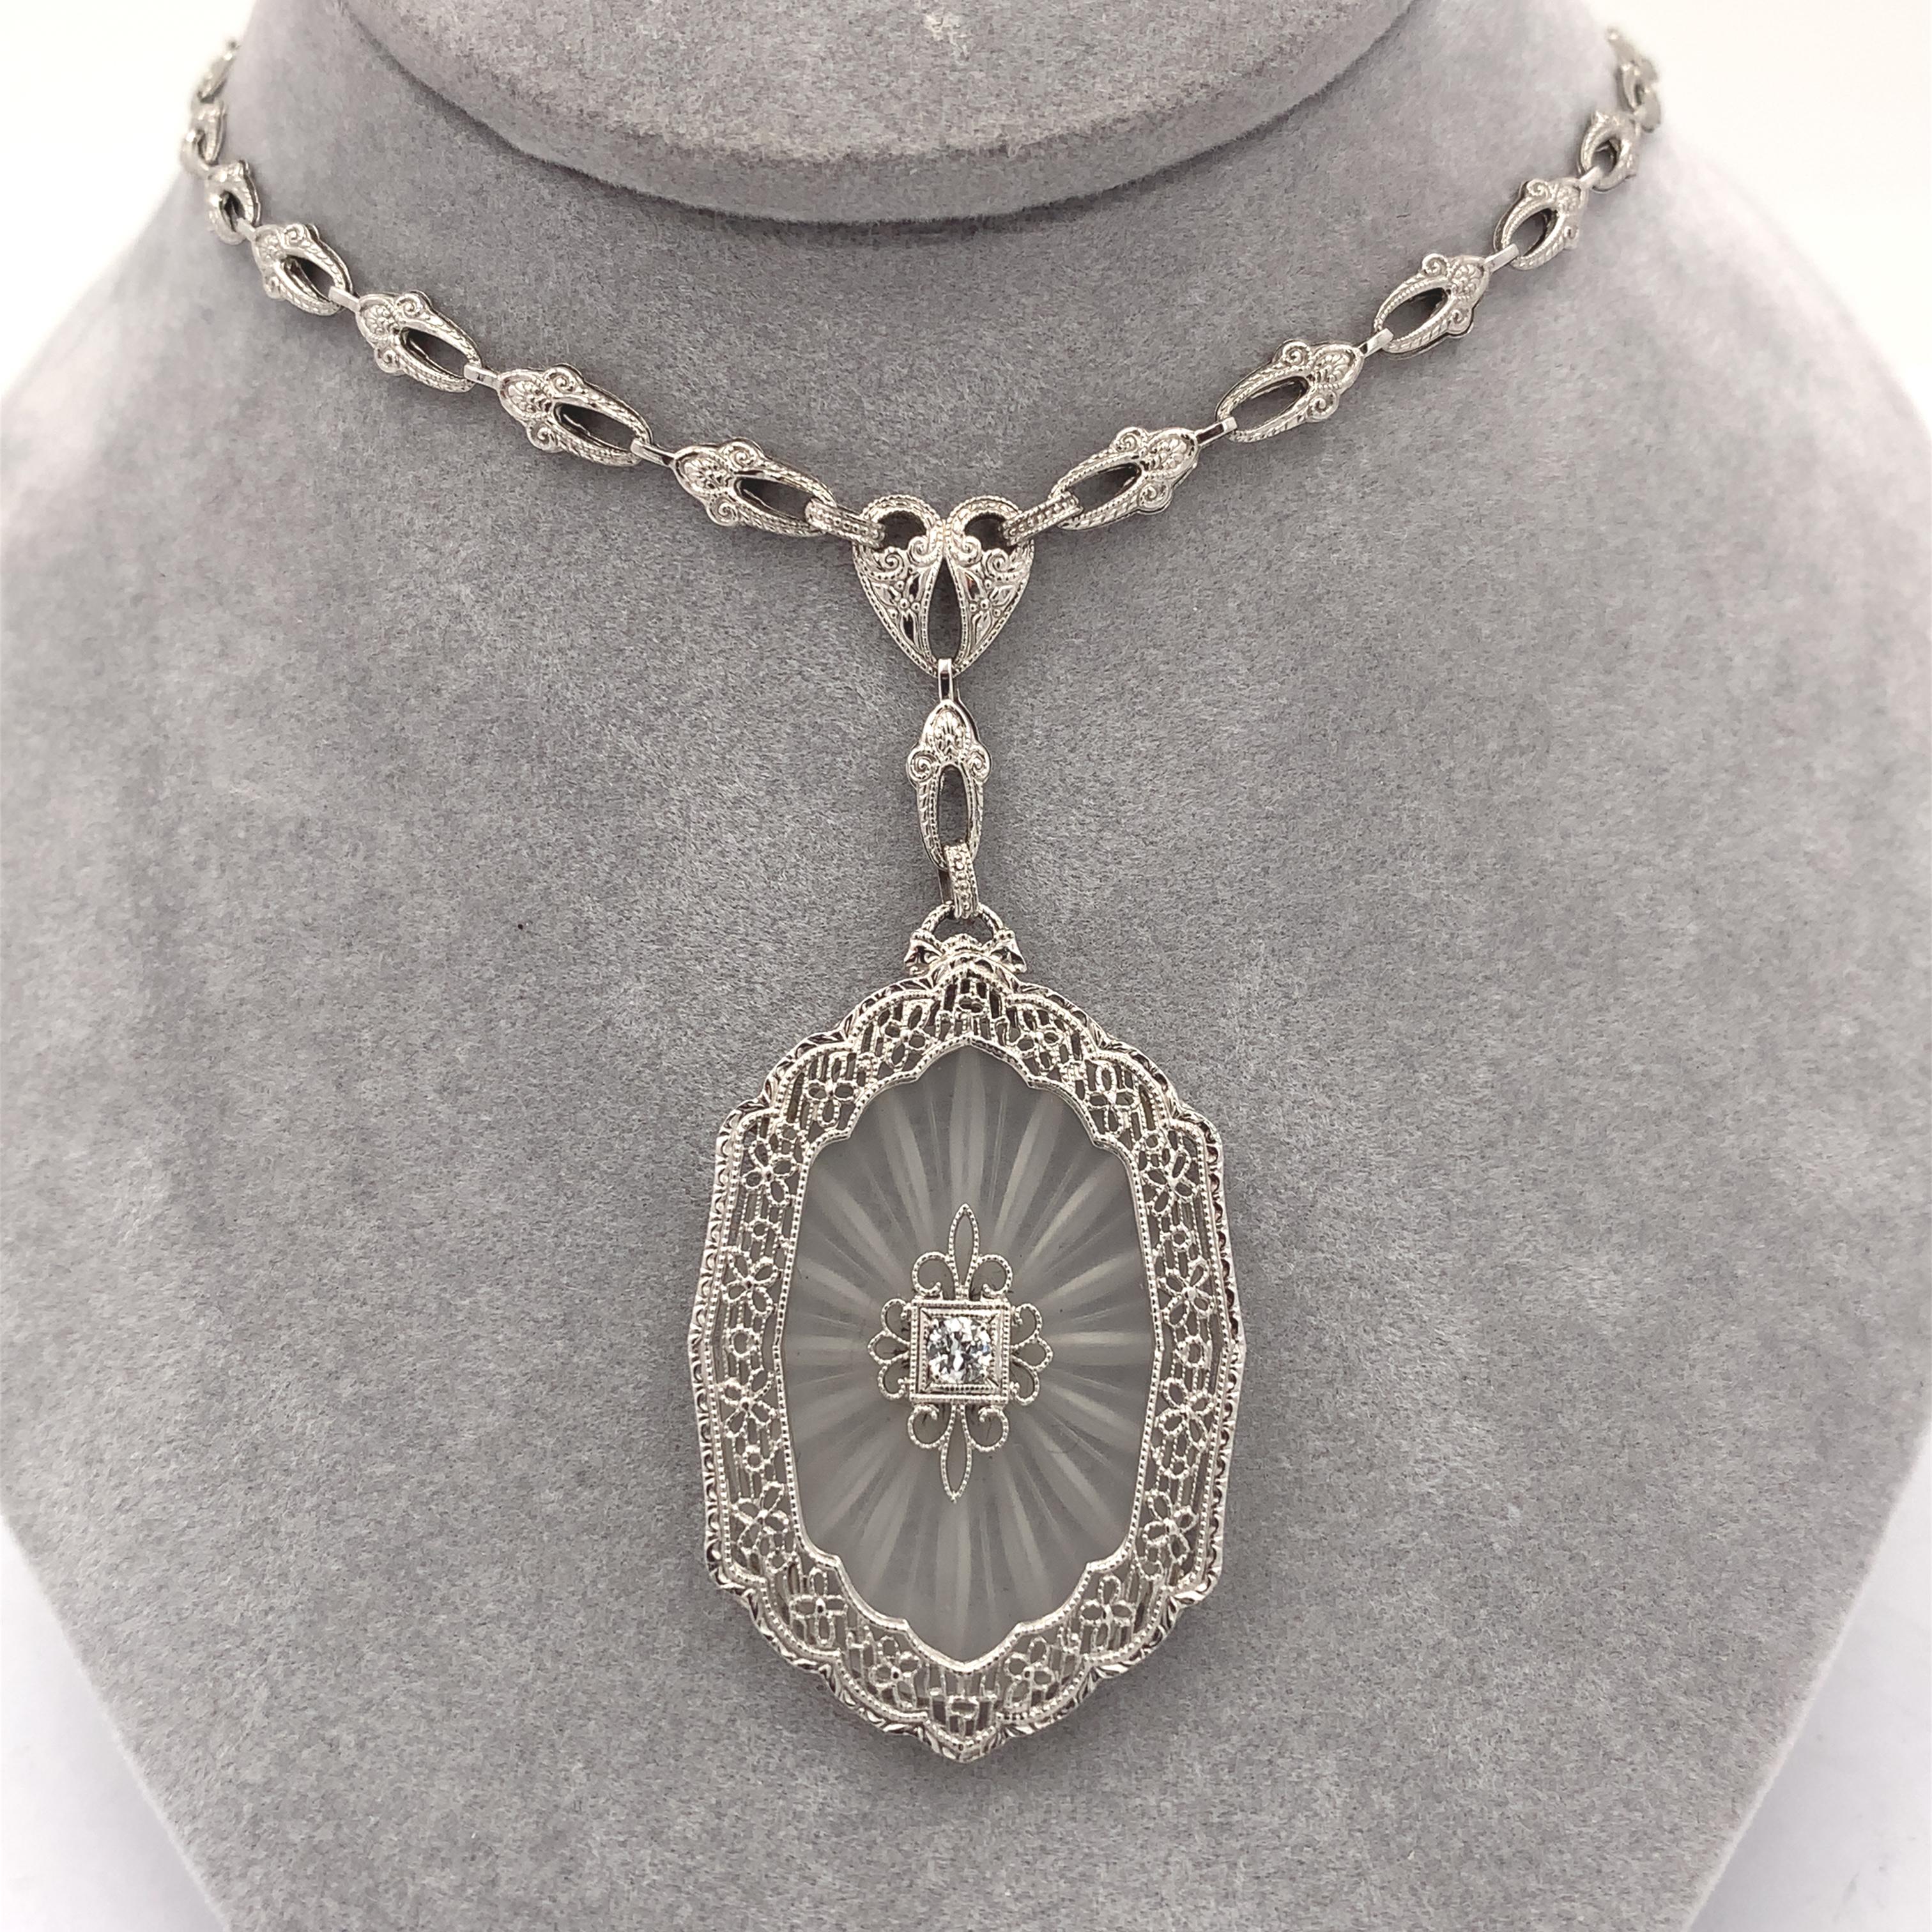 14K Filigree Rock Crystal Diamond Necklace with Cast Link Chain For Sale 1